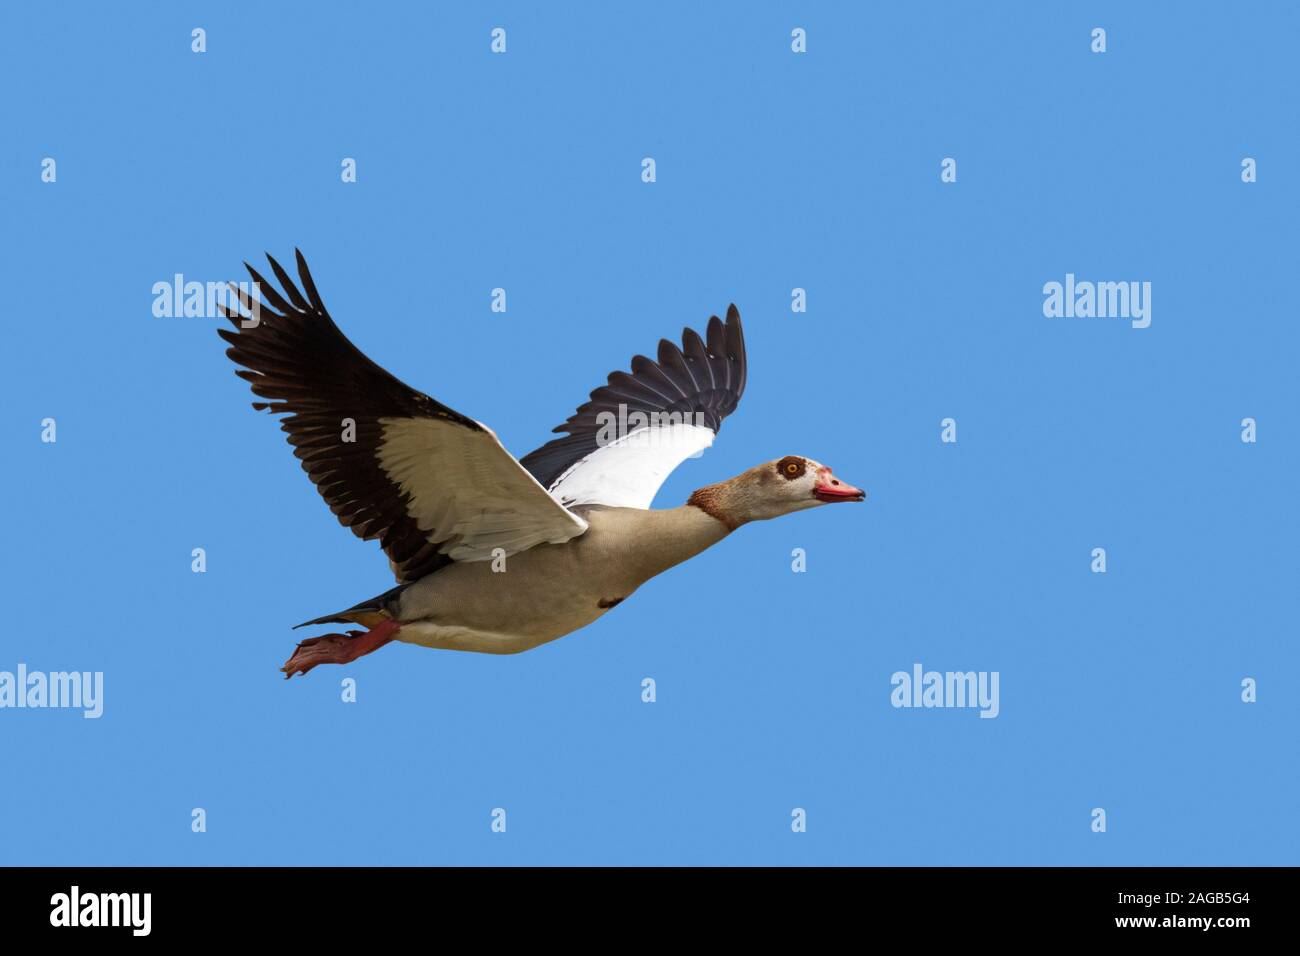 Egyptian goose (Alopochen aegyptiaca / Anas aegyptiaca) in flight against blue sky, native to Africa south of the Sahara and the Nile Valley Stock Photo